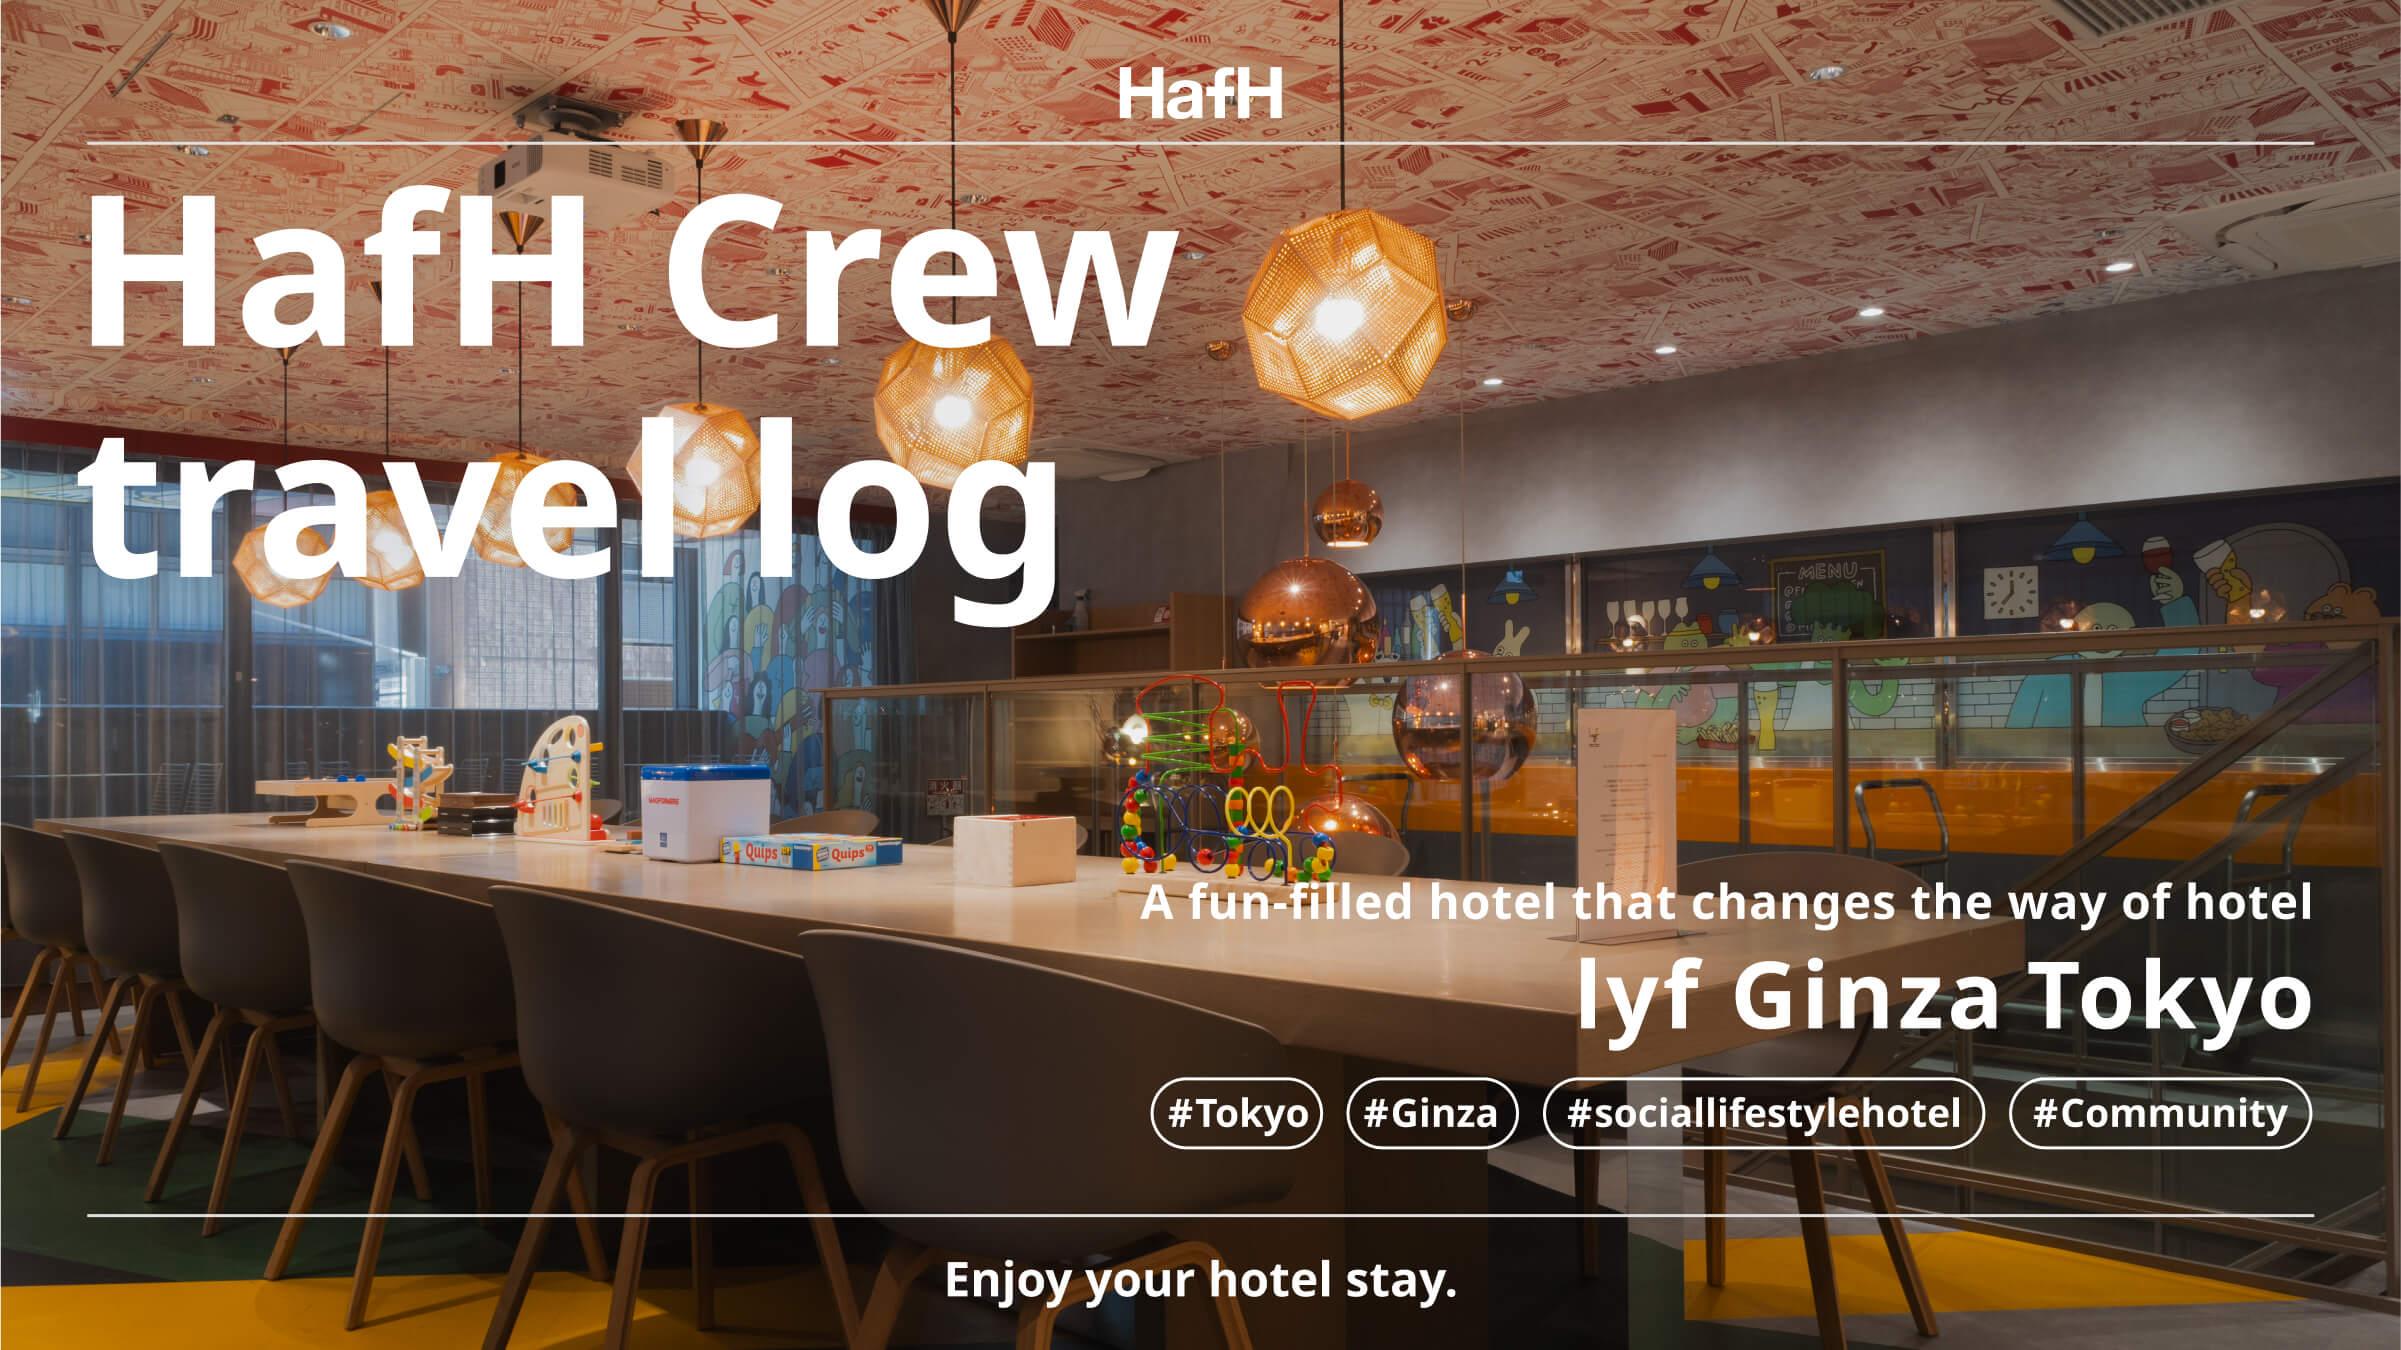 【HafH Crew travel log】Introducing a playful and enjoyable hotel in Tokyo – lyf Ginza Tokyo！